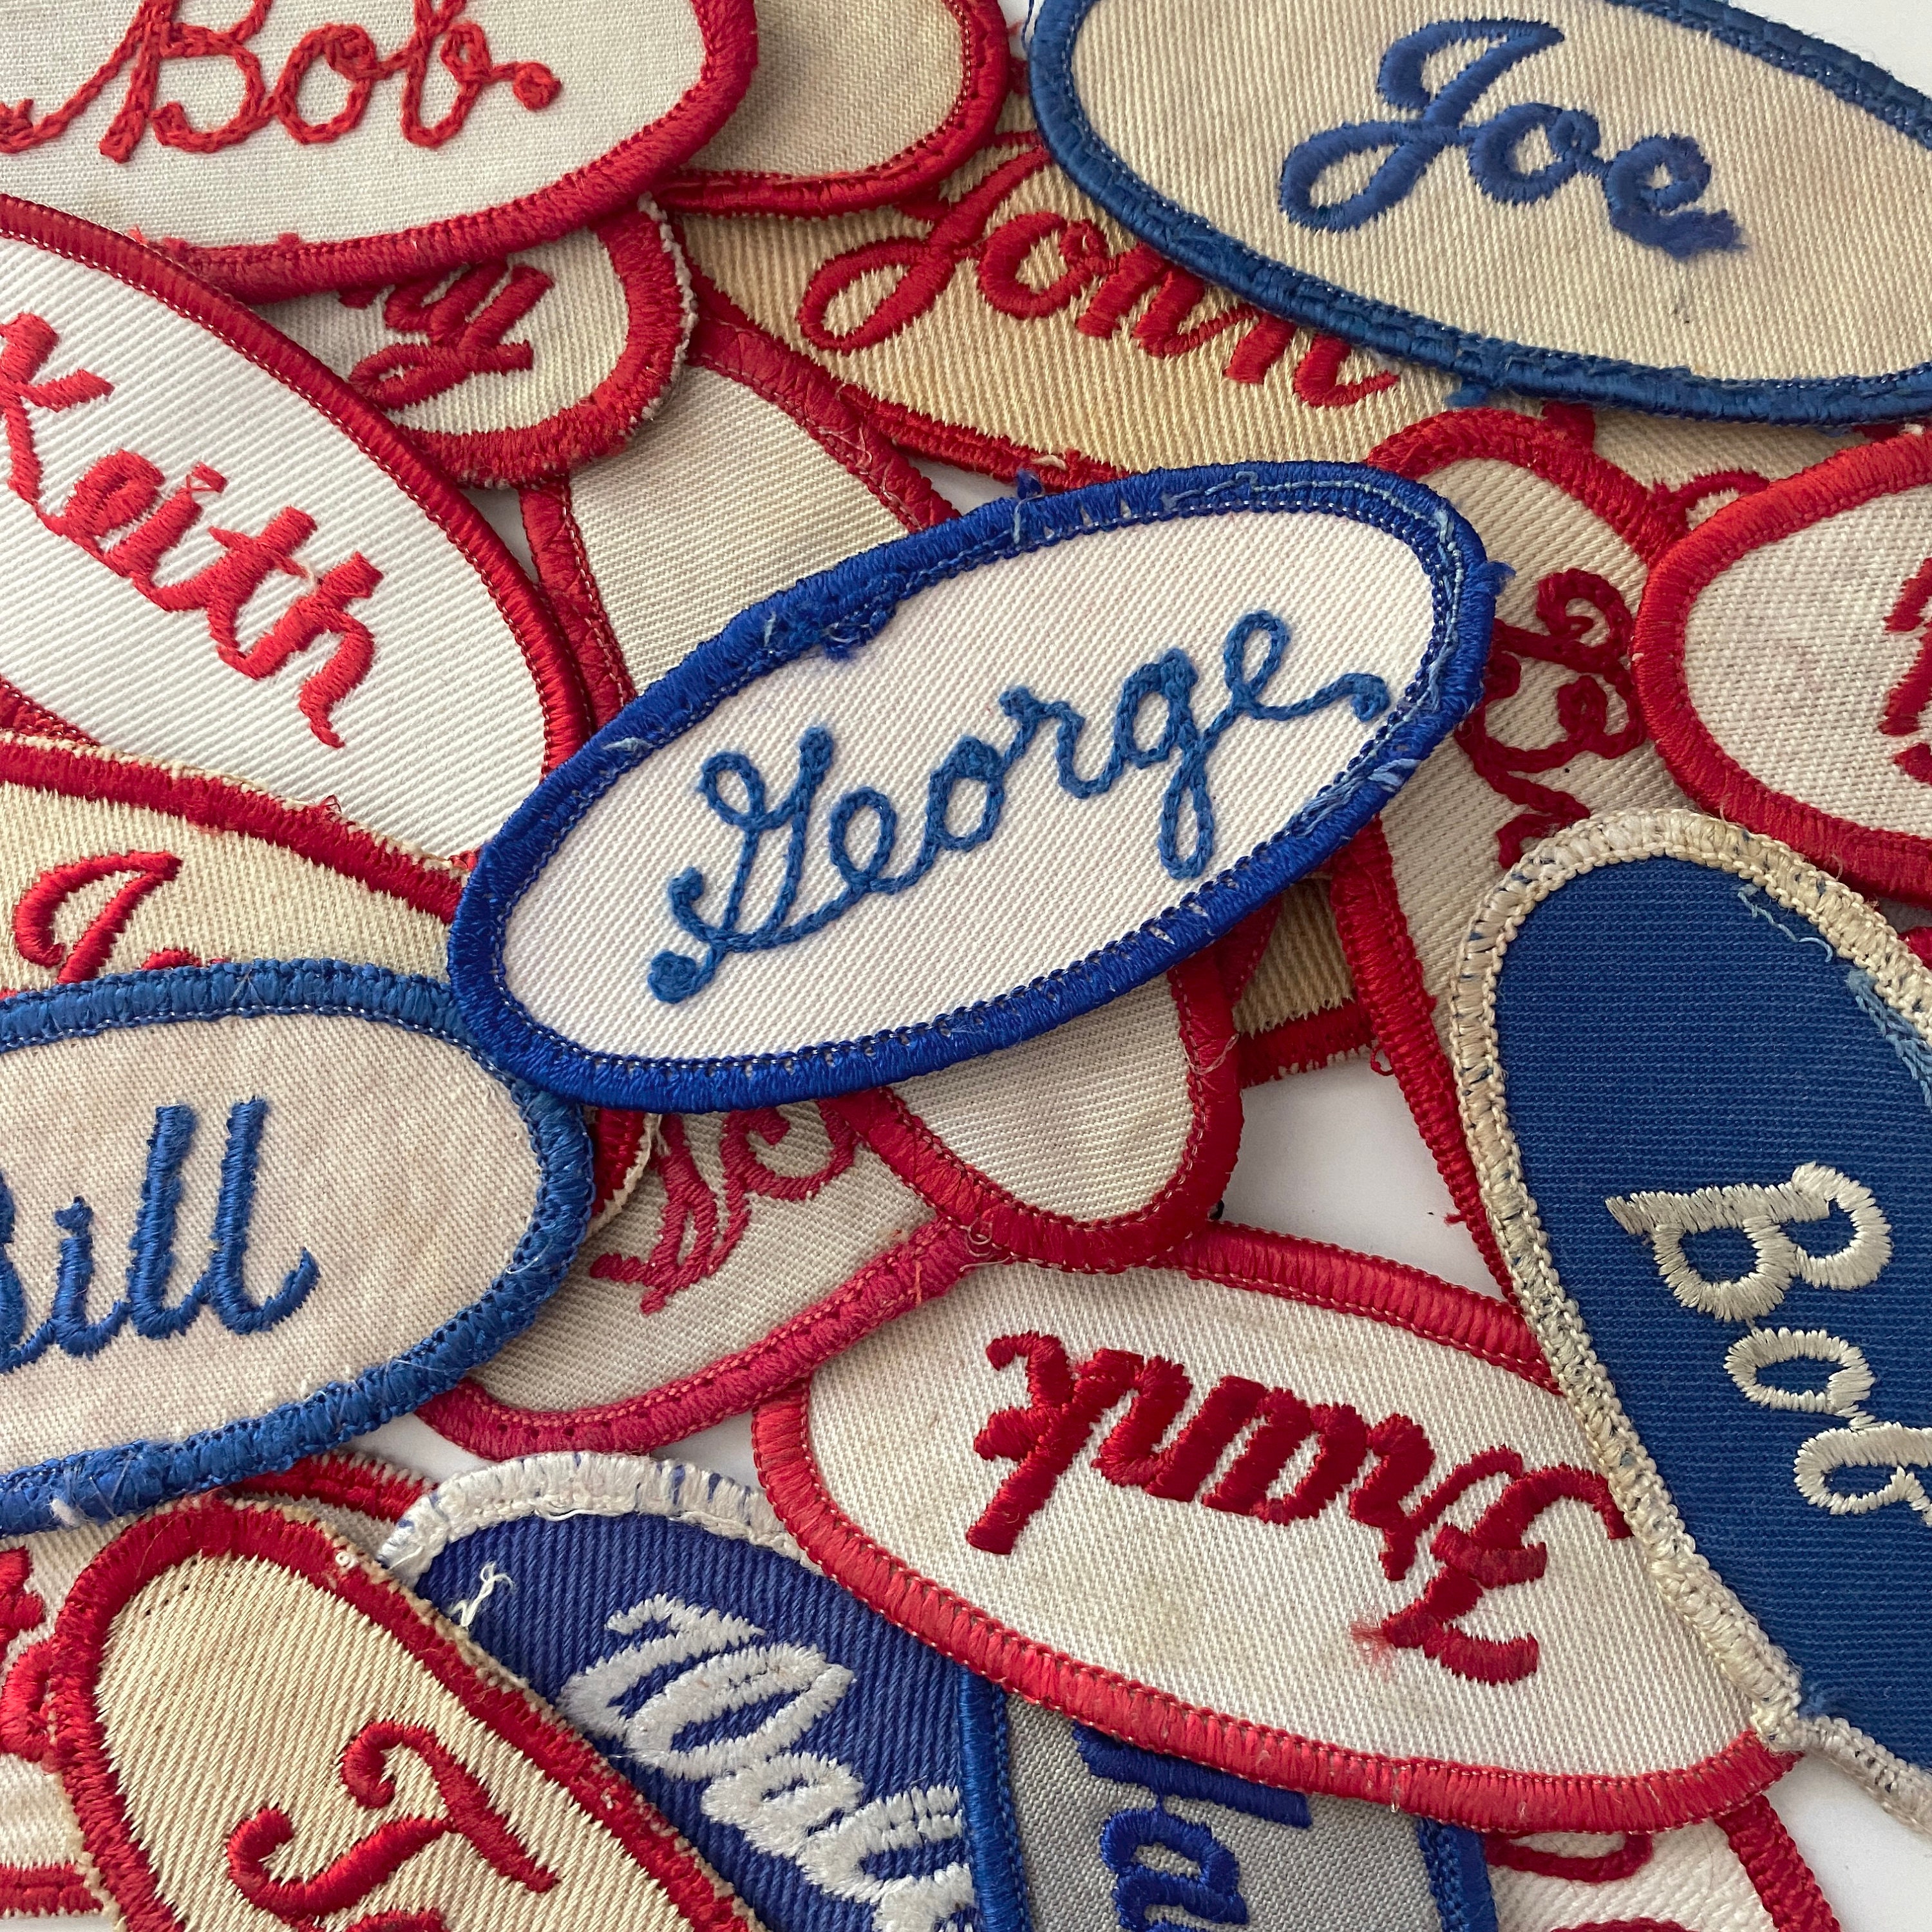 Vintage Lot of 25 Random 1960s Name Tags Work Job Uniform Sew-on Patches  Twill Names Blue/white No Duplicates 